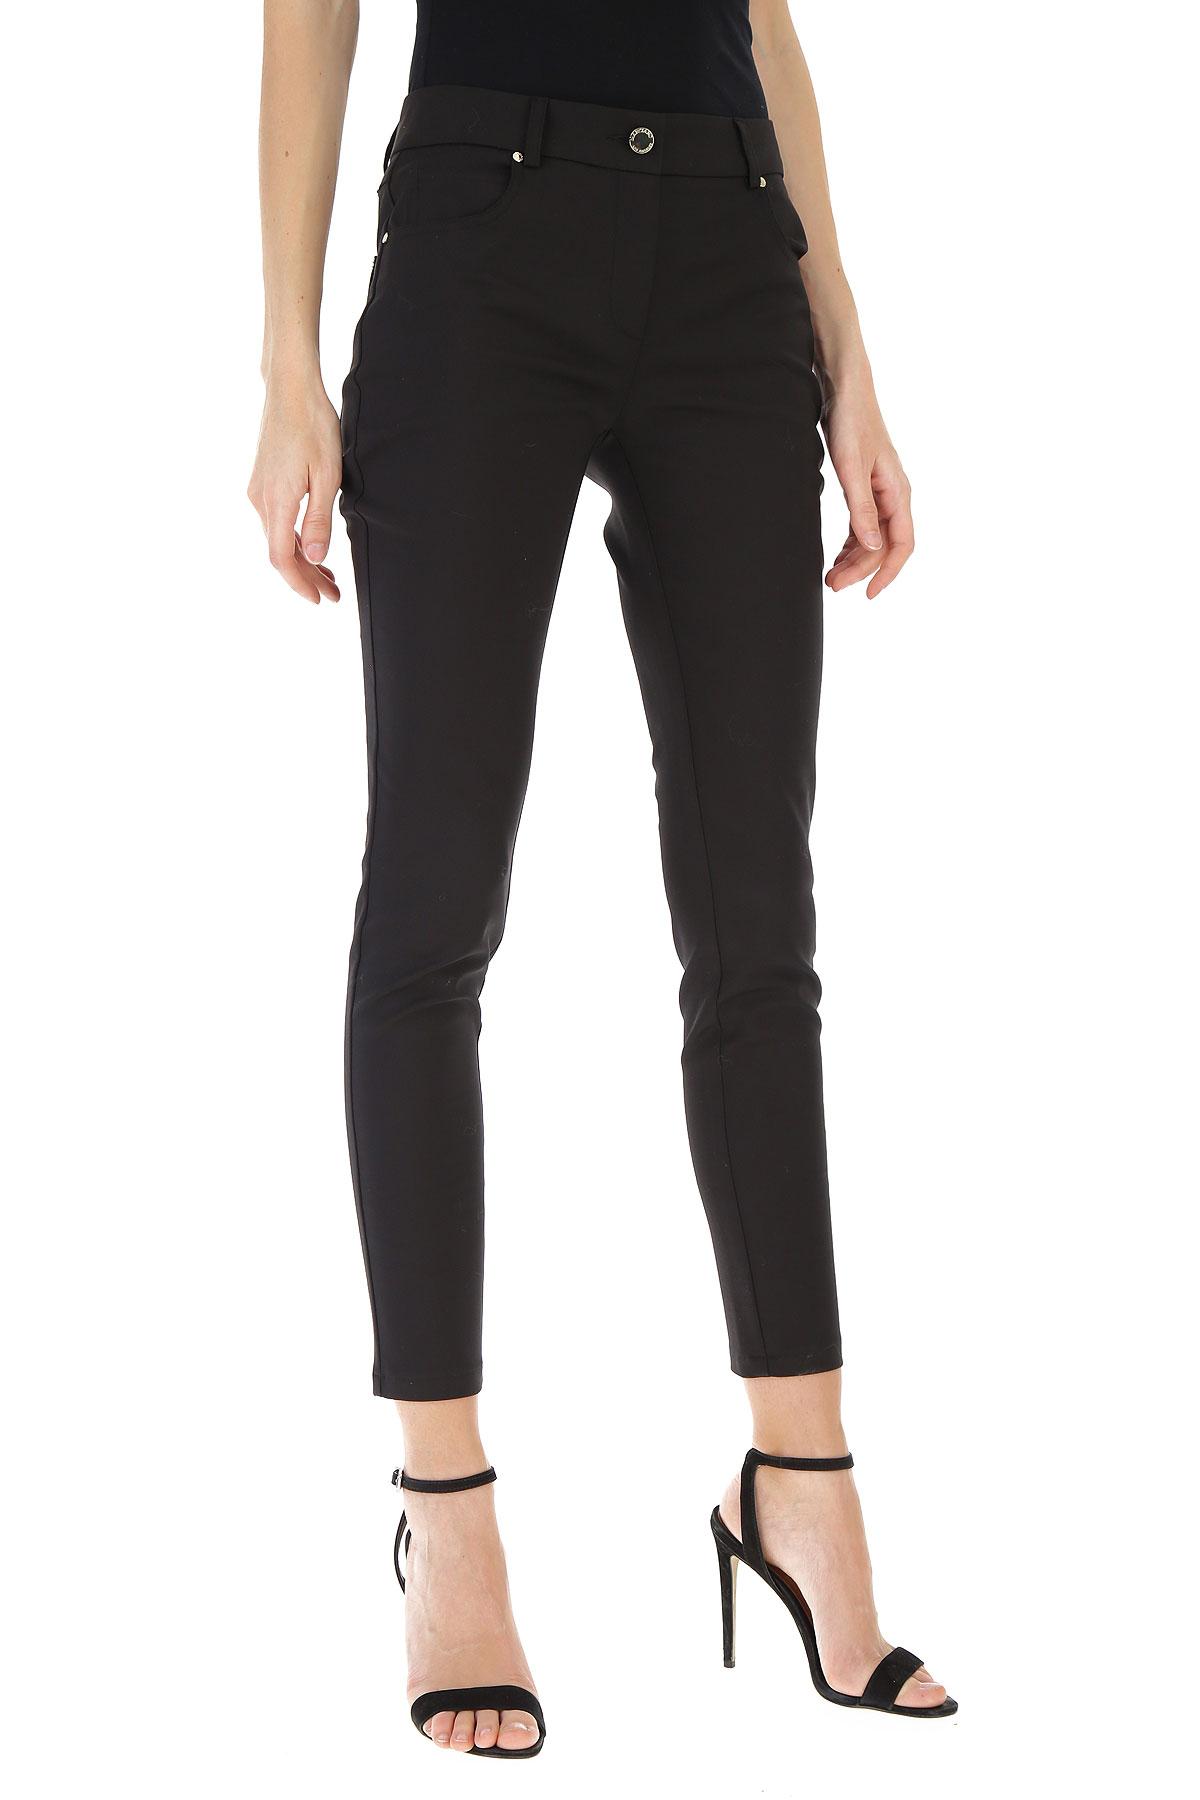 Guess Cotton Pants For Women On Sale in Black - Lyst